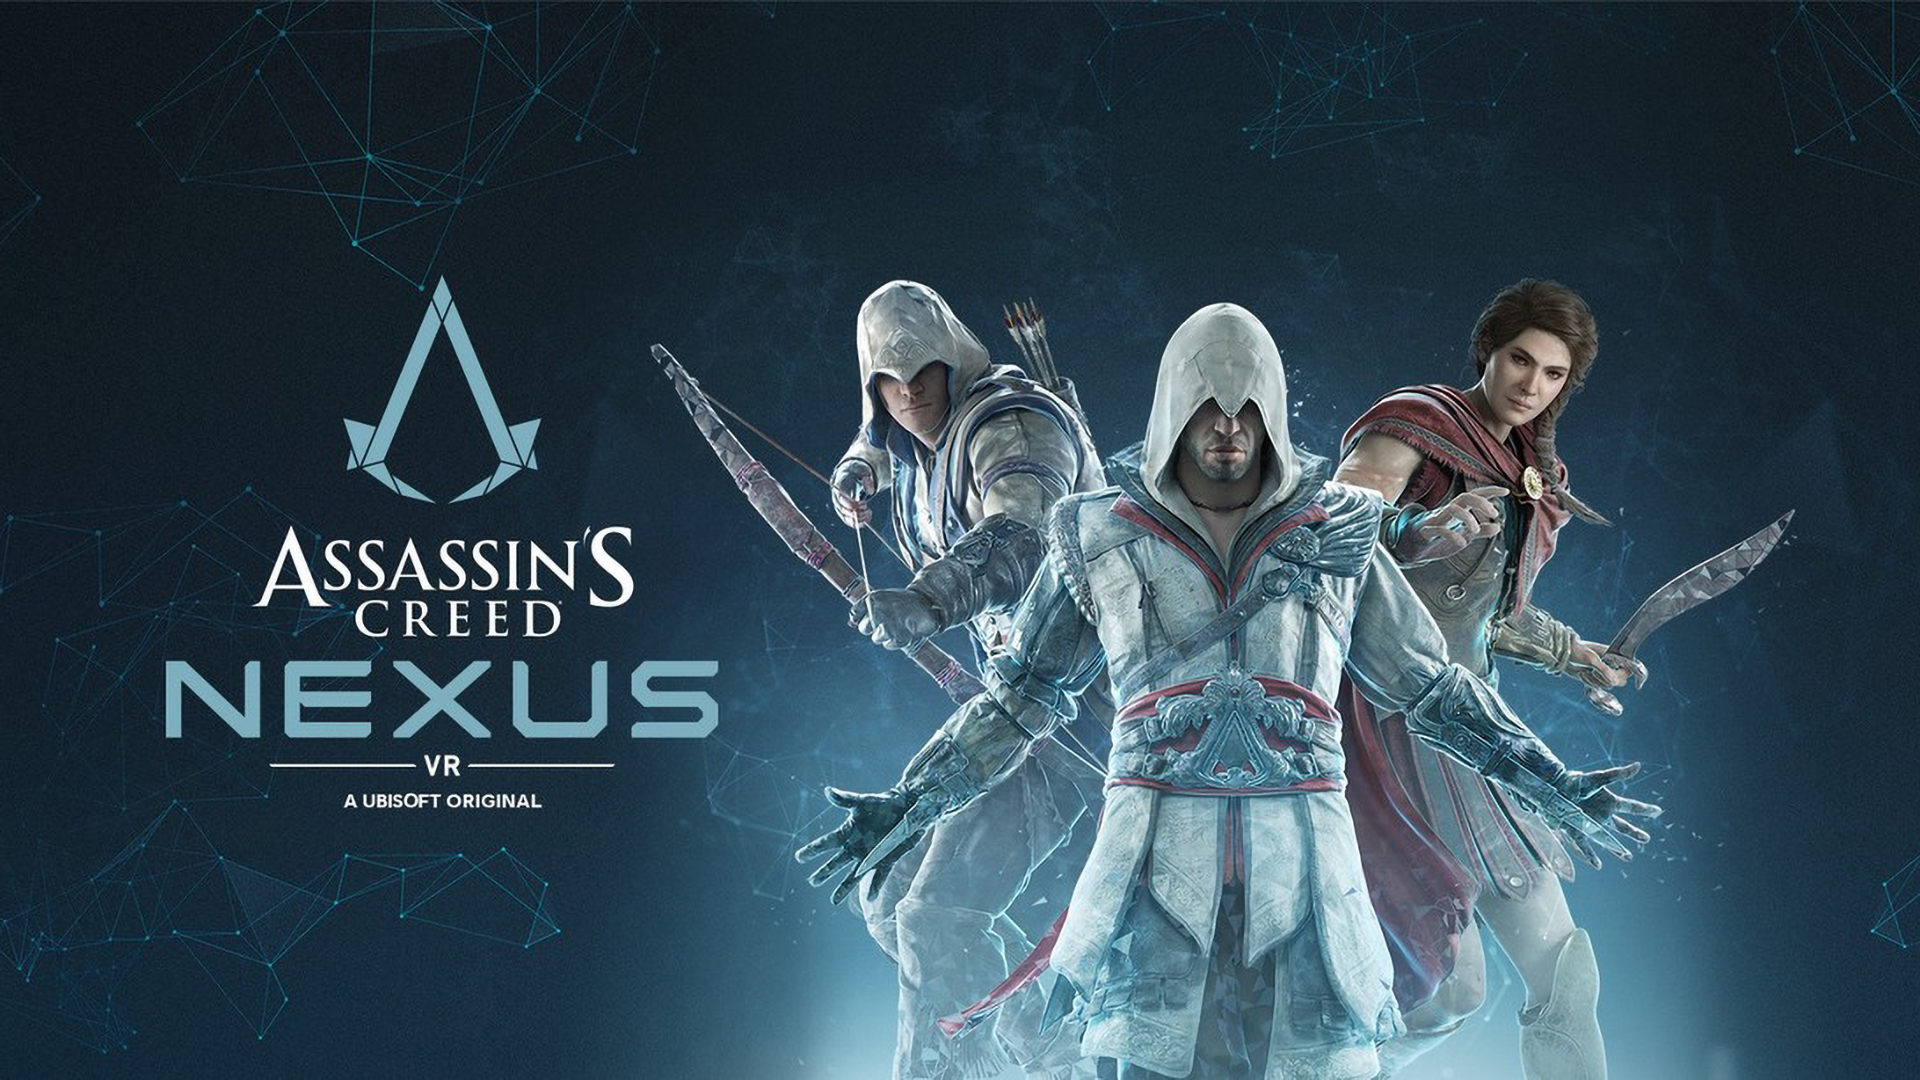 Take a 'Leap of Faith' and Dive (Literally) into Assassin's Creed Nexus VR